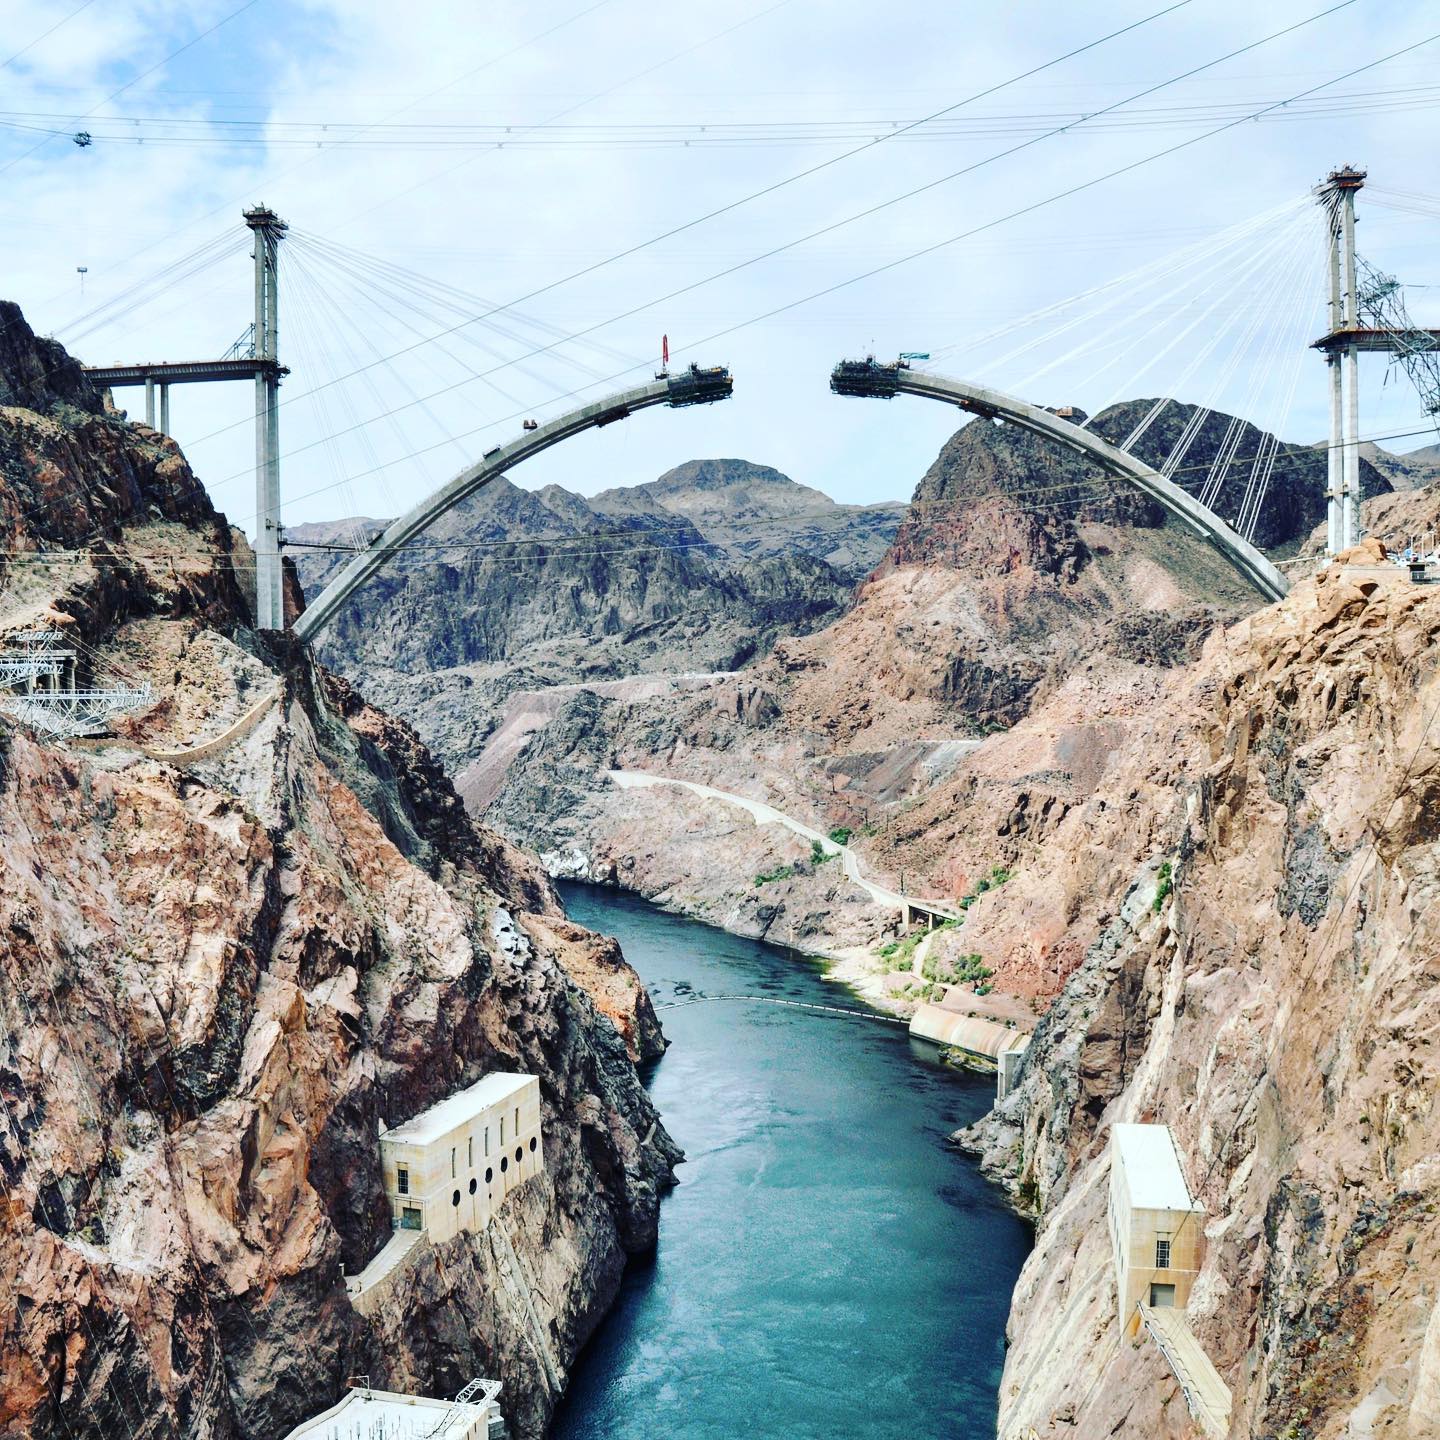 Hoover Dam - Mike O'Callaghan-Pat Tillman Memorial Bridge
The bridge connects Arizona and Nevada. When under construction, the bridge was referred to as the Hoover Dam Bypass Project. It is now named the Mike O'Callaghan-Pat Tillman Memorial Bridge. The photo must have been taken during our first road trip in 2009.
#usatravels #roadtripusa🇺🇸 #ontheroad #2009 #hooverdam #nevada #arizona  #coloradoriver #mikeocallaghanpattillmanmemorialbridge #bridgephotography #bridges #underconstruction